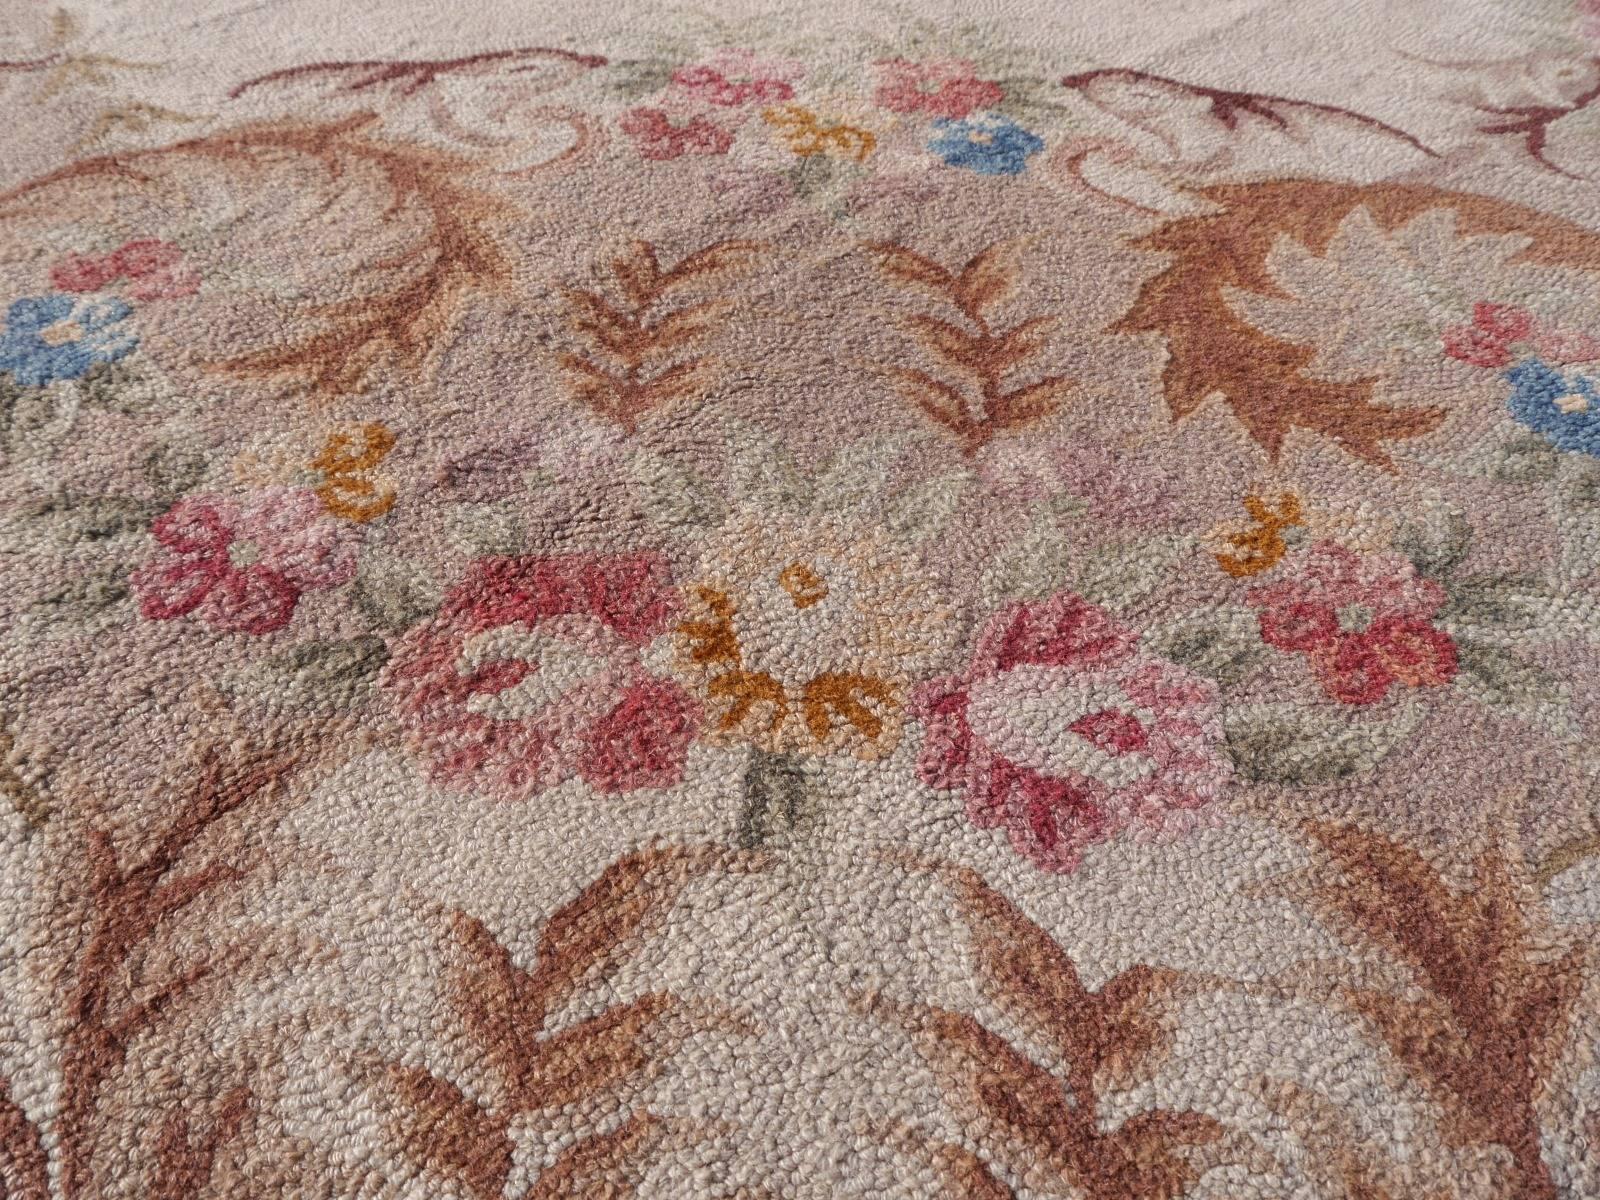 1920s Needlepoint European Rug Arts and Crafts Period/Savonnerie Design In Good Condition For Sale In Lohr, Bavaria, DE